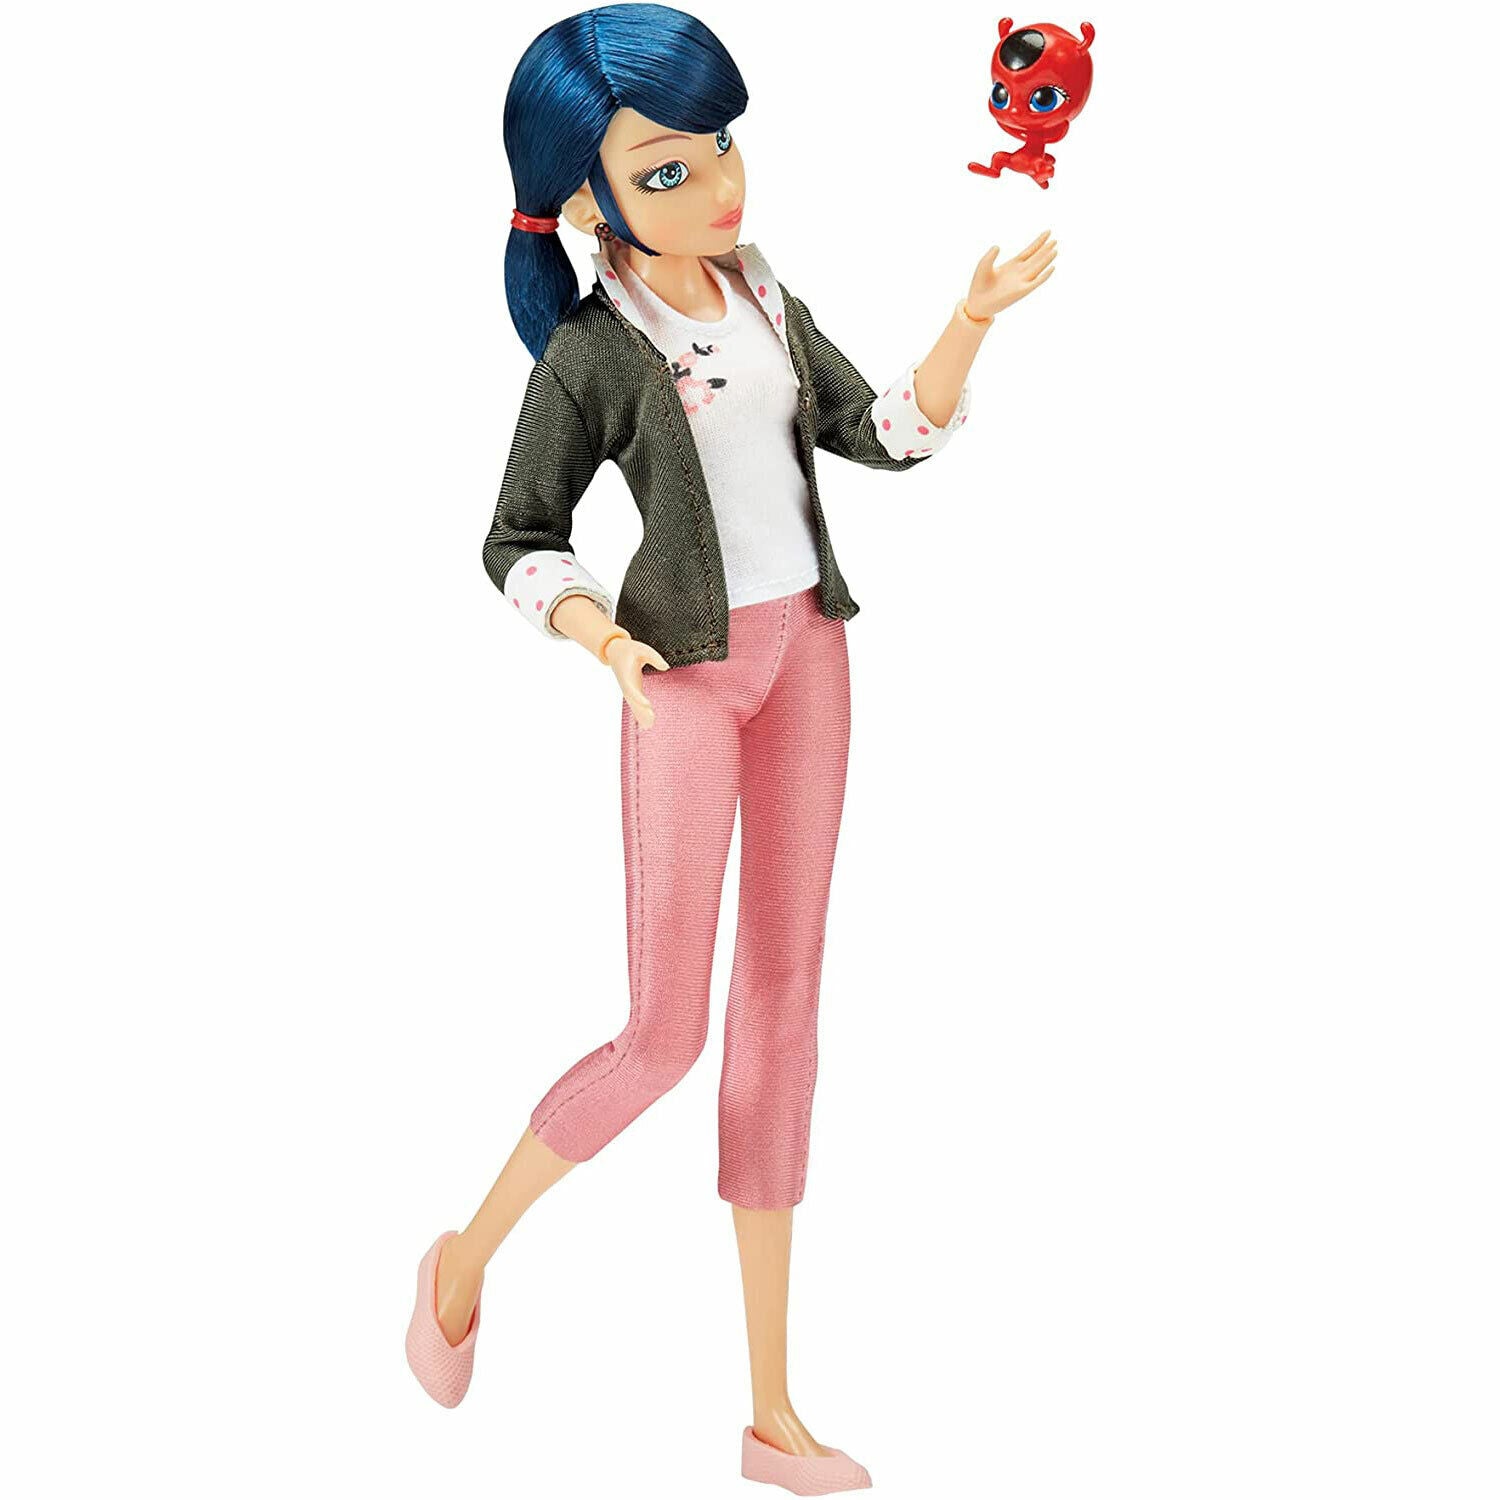 New Miraculous Marinette Fashion Doll - 26cm - Free Shipping